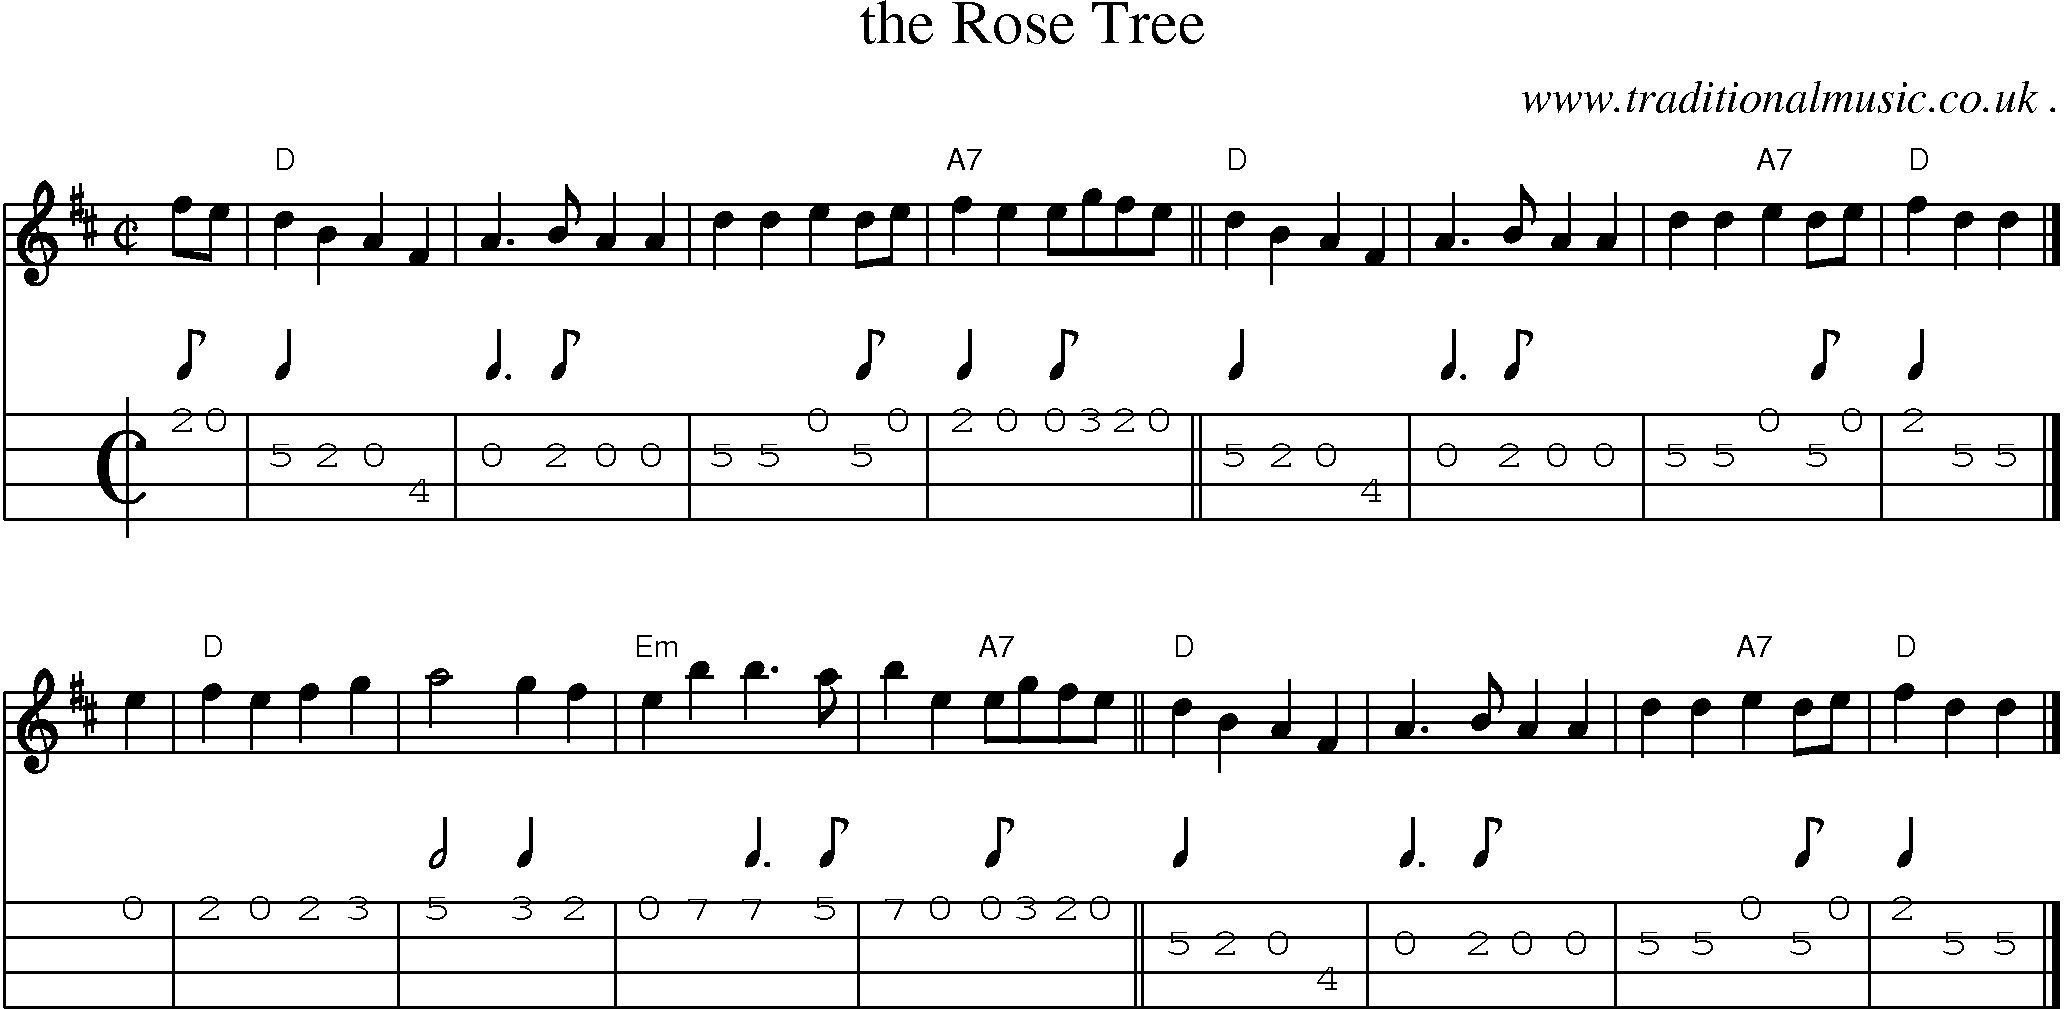 Sheet-music  score, Chords and Mandolin Tabs for The Rose Tree